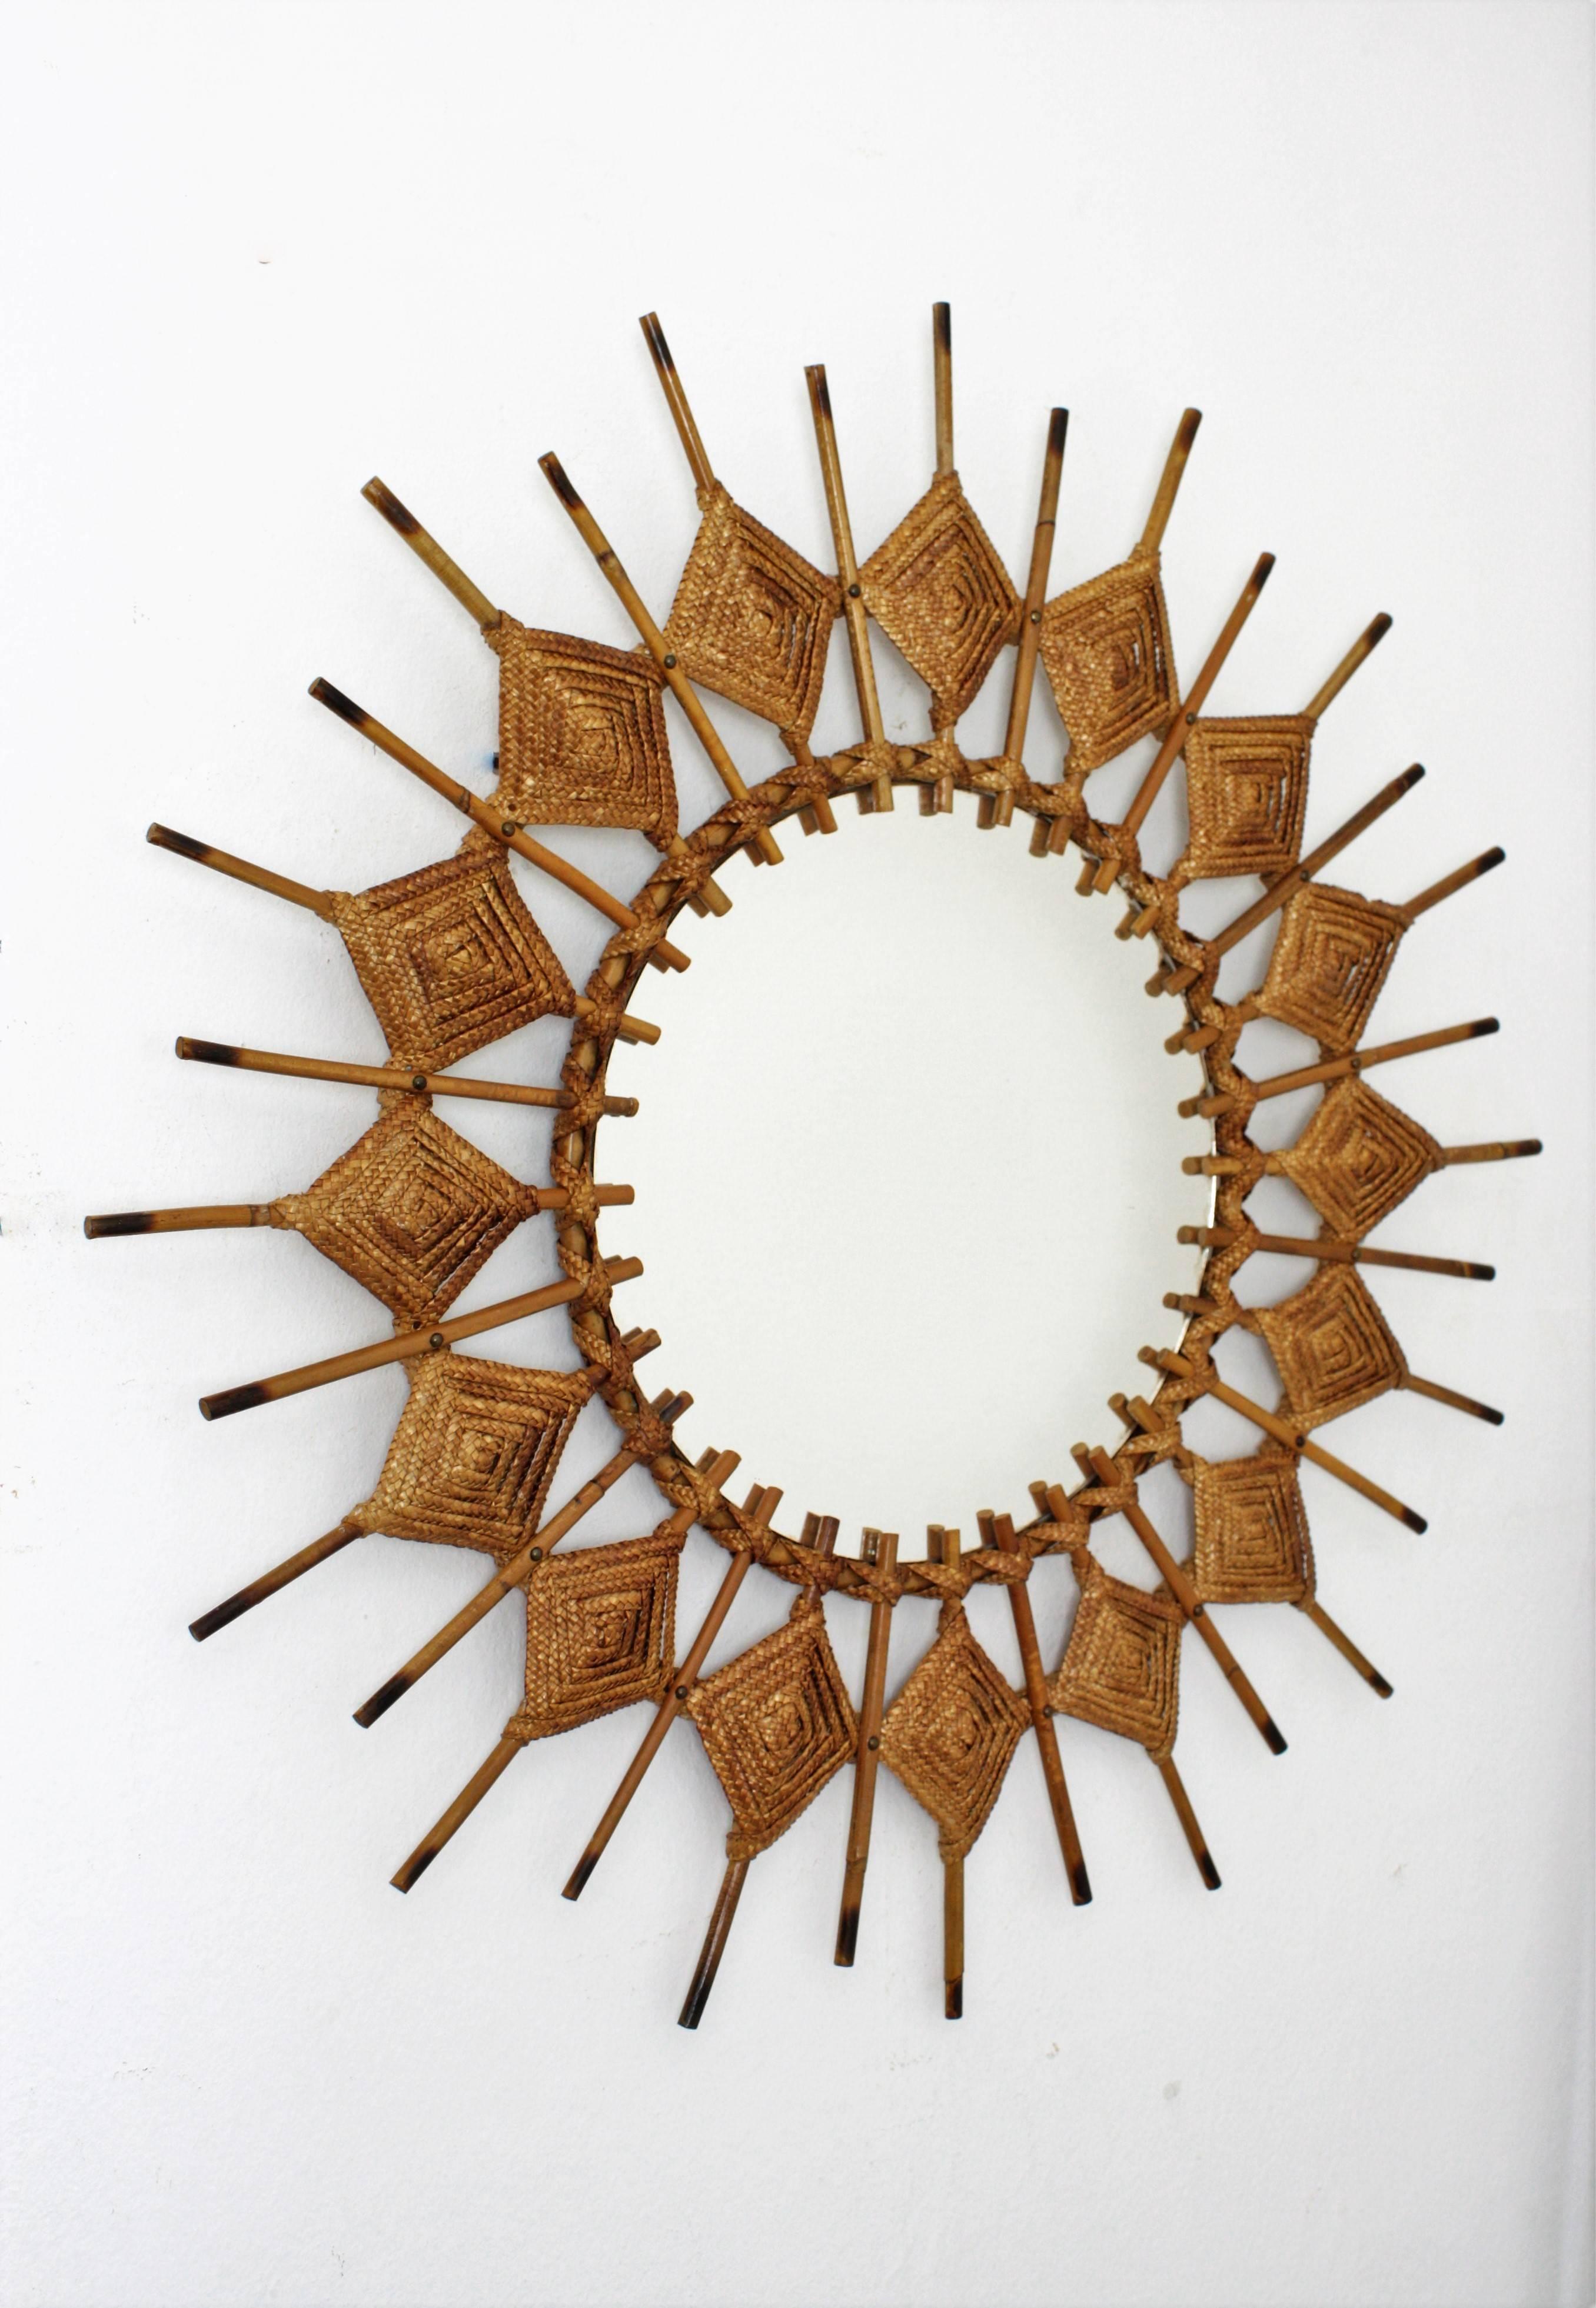 Beautiful and unusual handcrafted rattan sunburst or starburst mirror. Mediterranean coast style. Woven natural fiber rhombus decorations on the frame.
Highly decorative placed with other mirrors in this manner as a wall decoration. Also beautiful